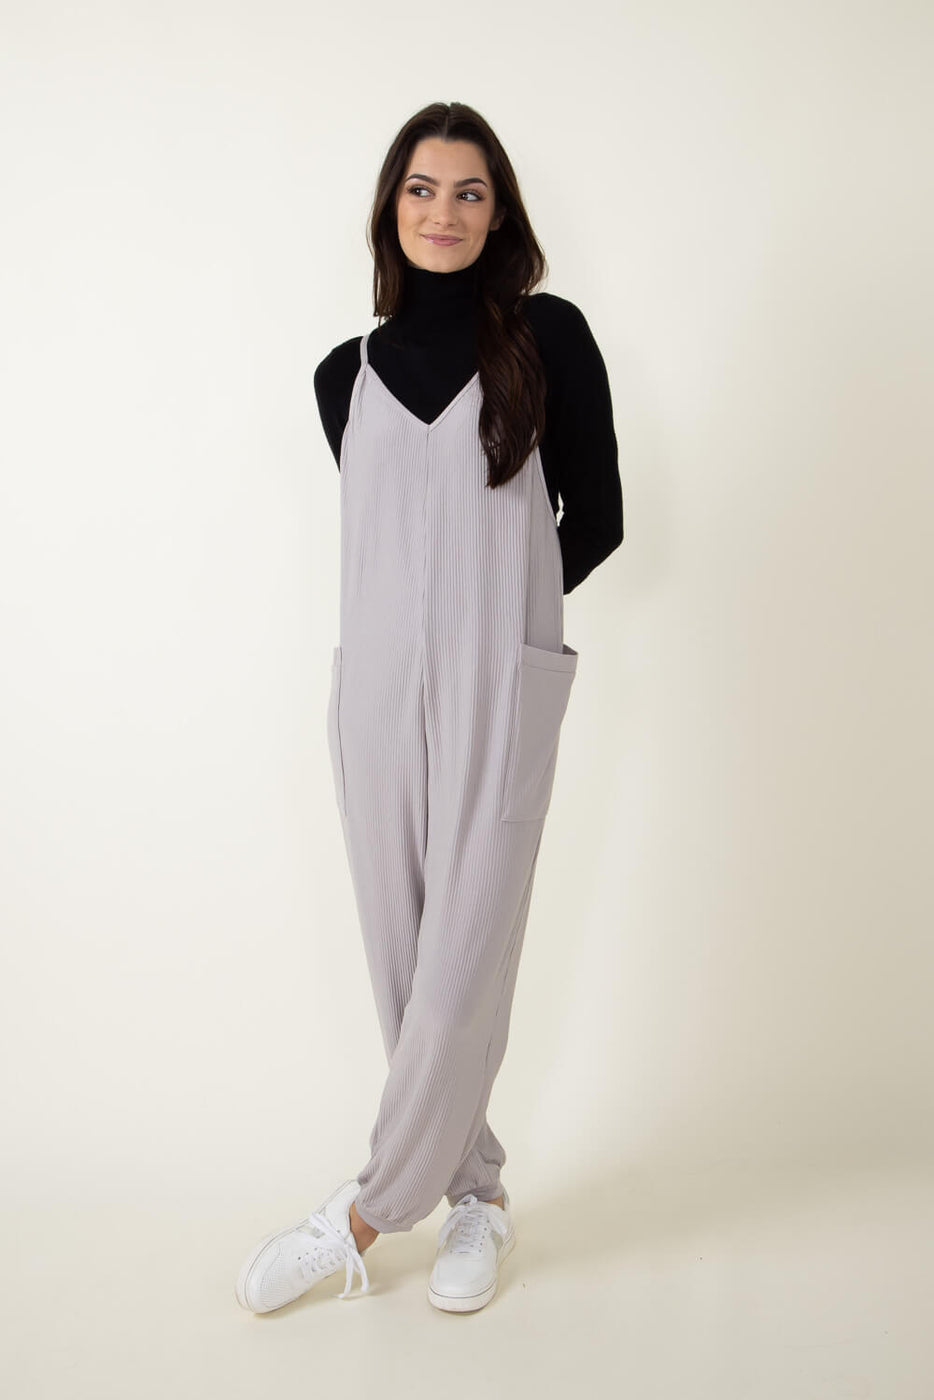 Illa Illa Ribbed Knit Onesie Jumpsuit for Women in Grey | P1738 